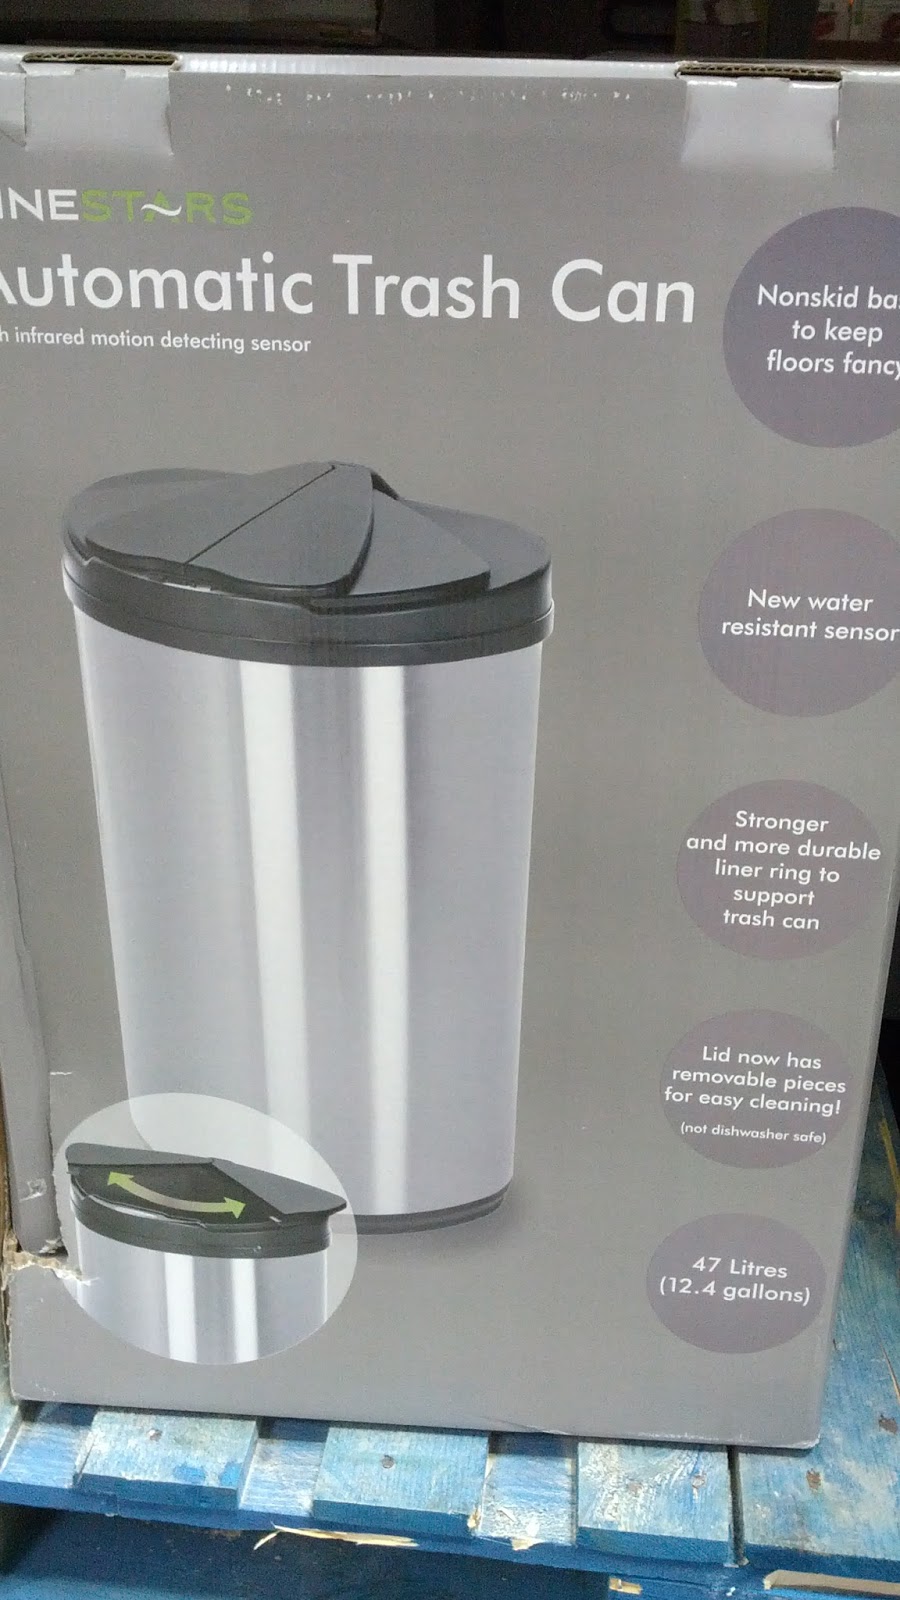 Charming costco trash can touchless Nine Stars Automatic Stainless Steel Trash Can Costco Weekender